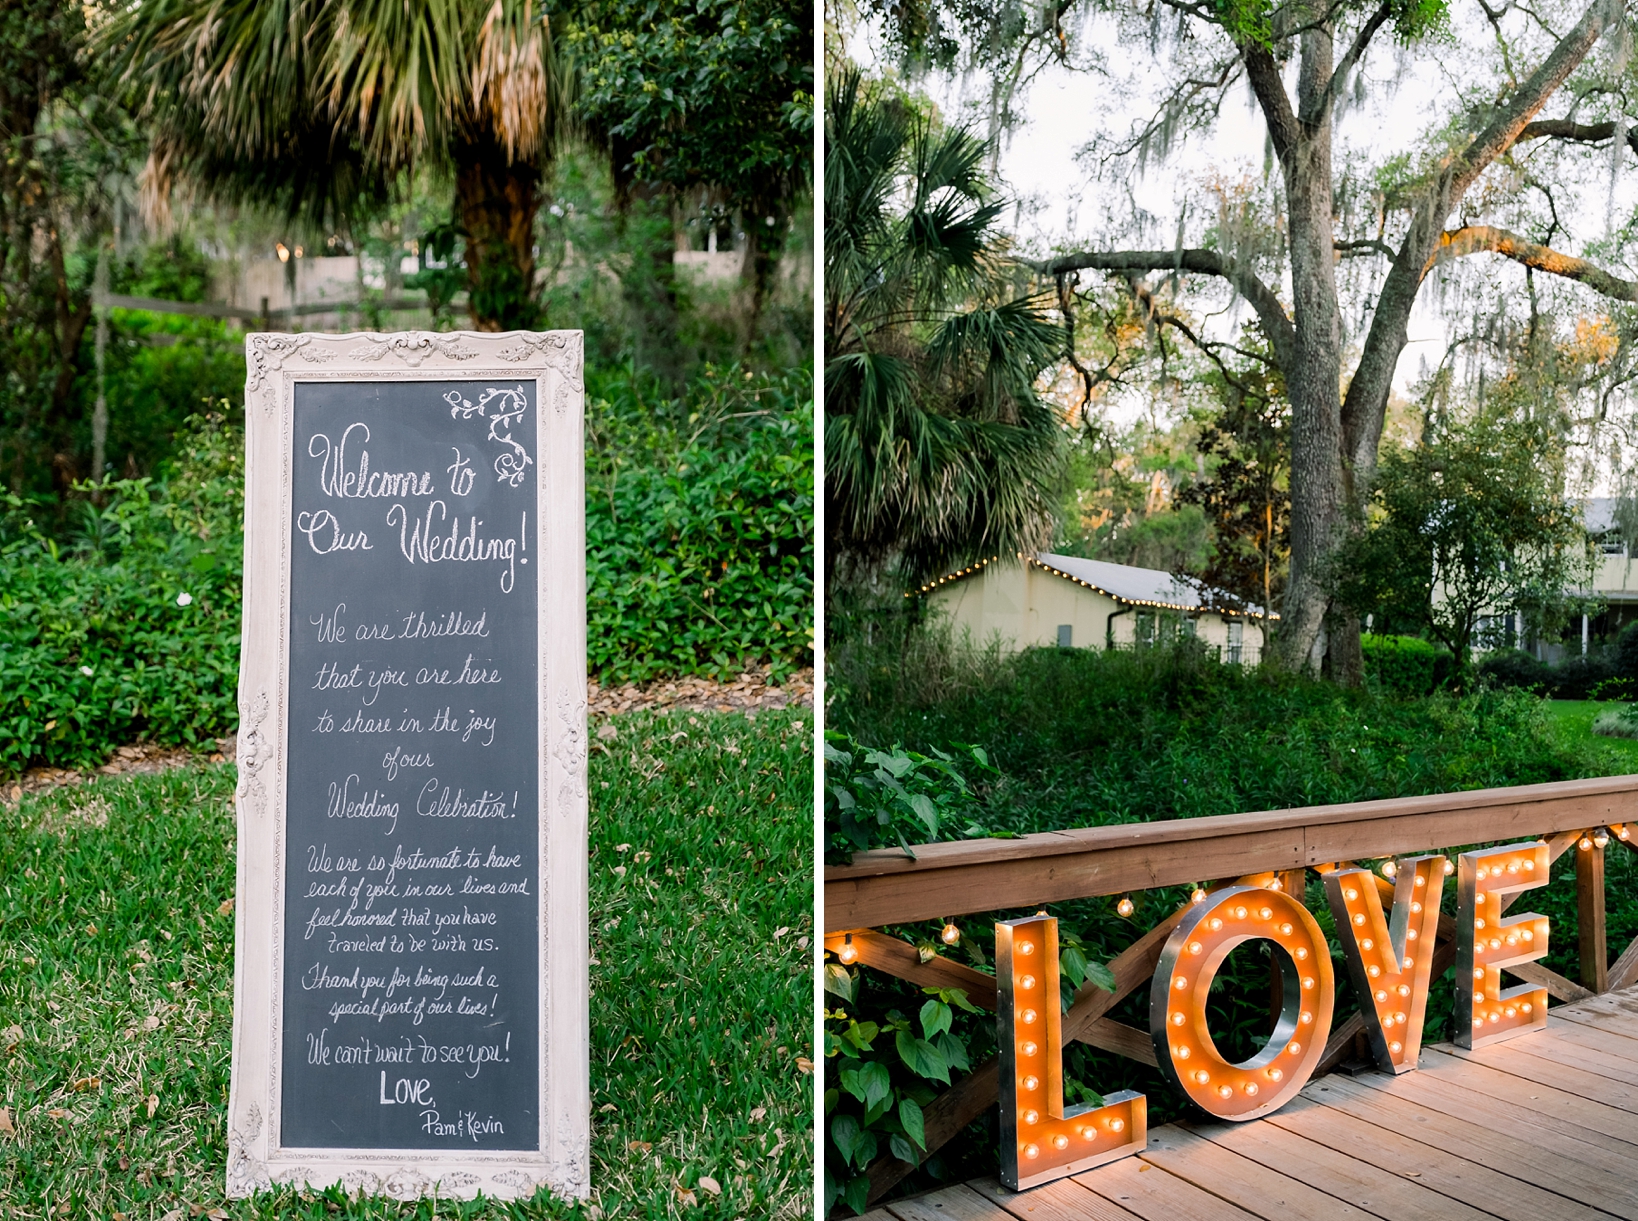 Ceremony signs for the wedding and a light up sign that says "Love"